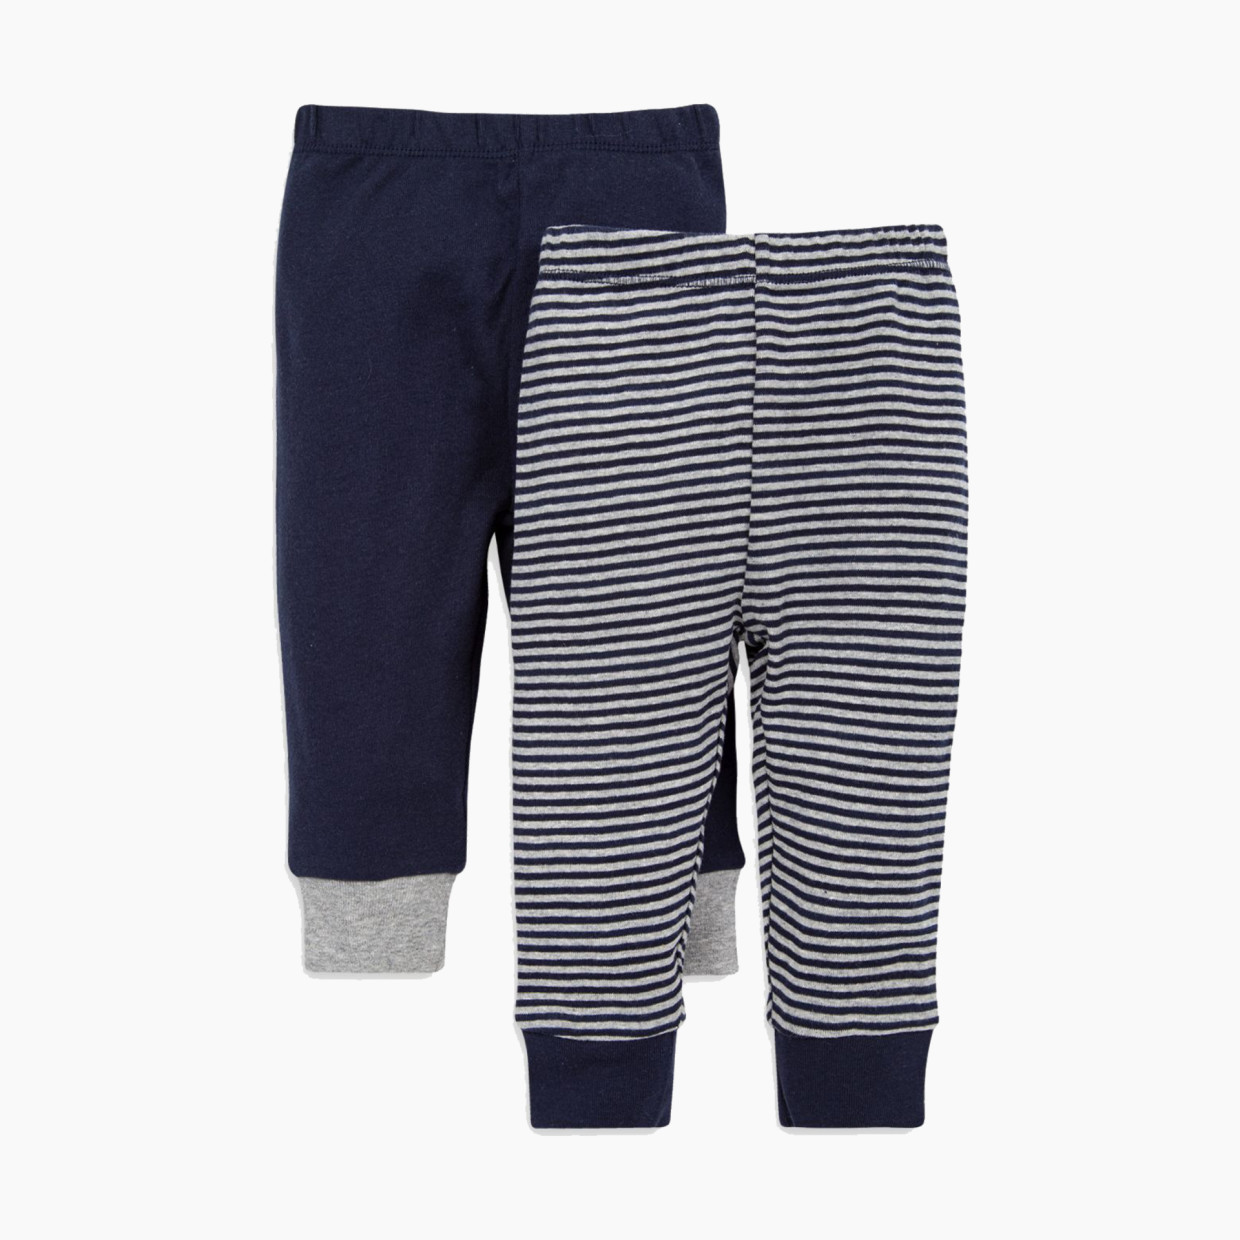 Burt's Bees Baby Organic Footless Pants (2 Pack) - Midnight, 0-3 Months.